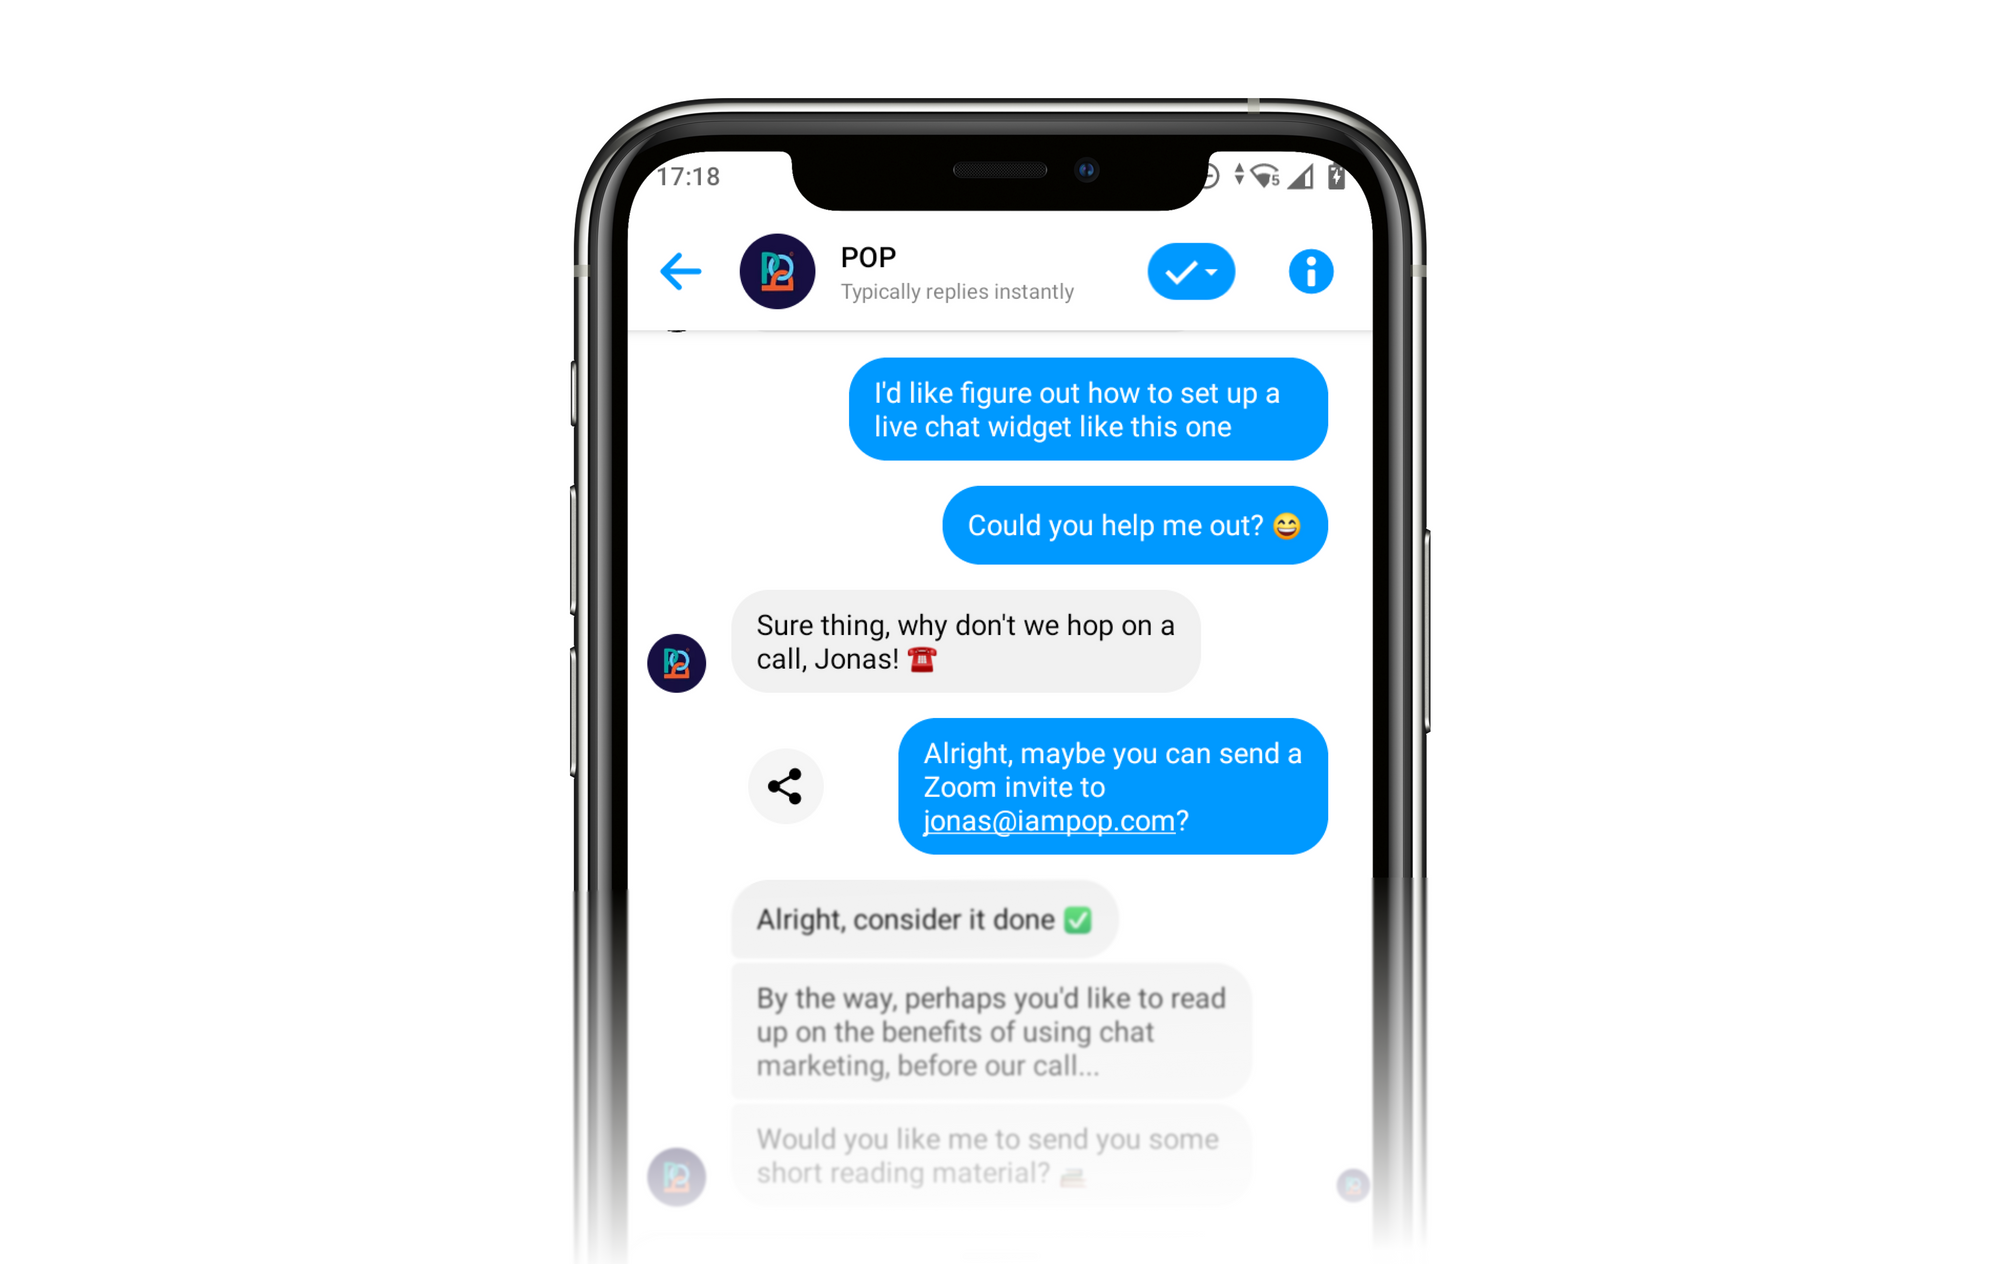 Adding-a-personal-touch-with-live-chat